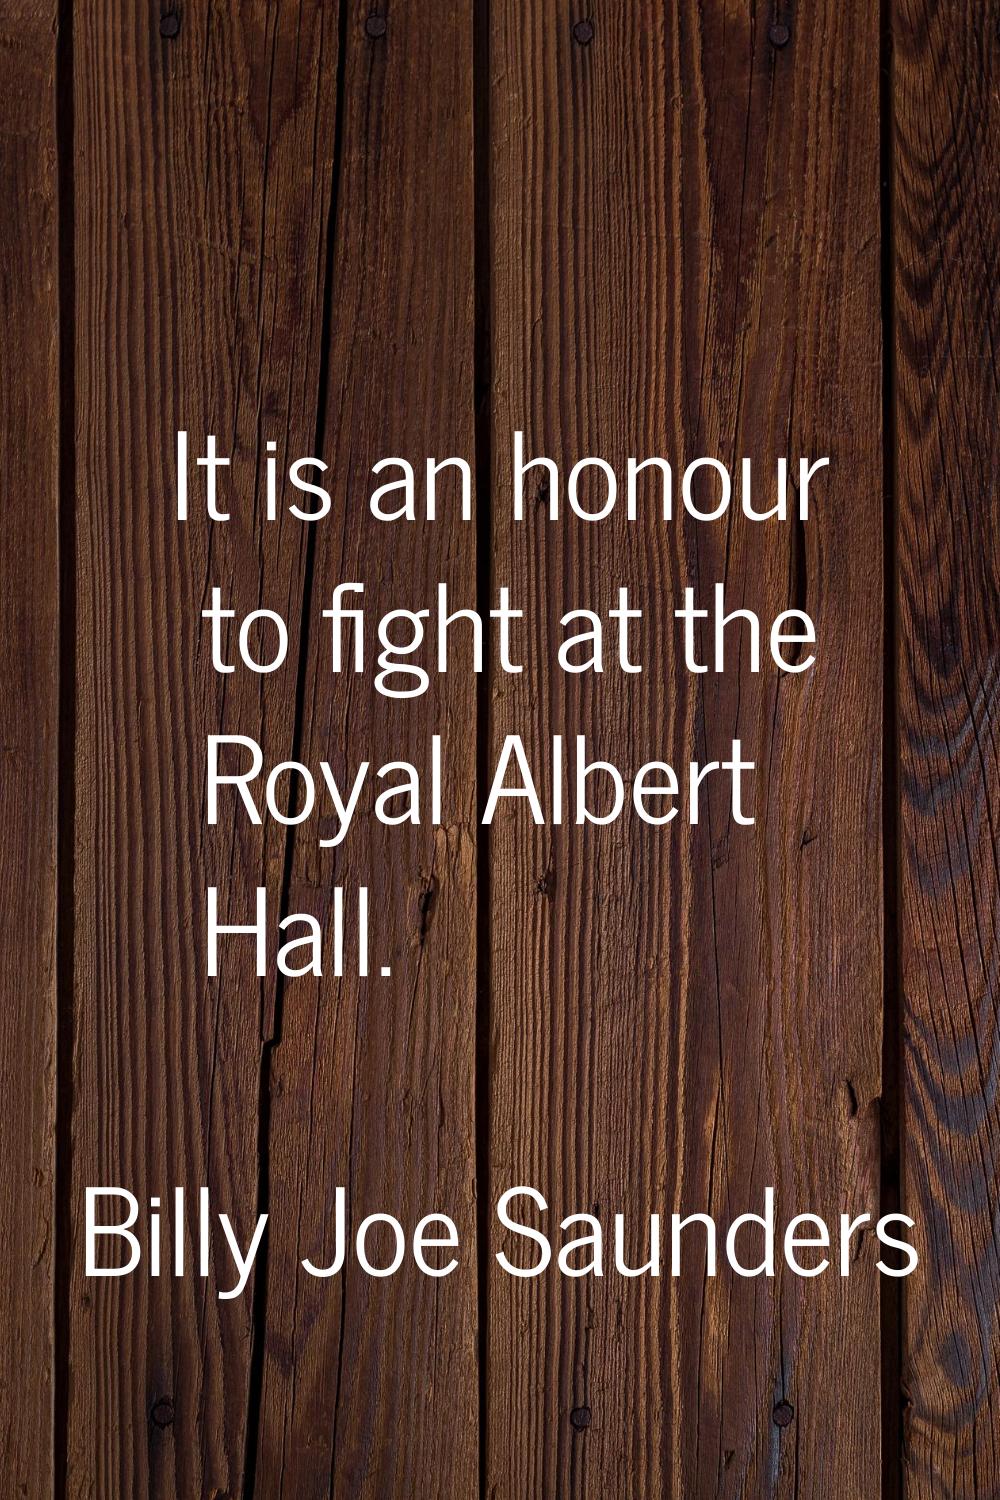 It is an honour to fight at the Royal Albert Hall.